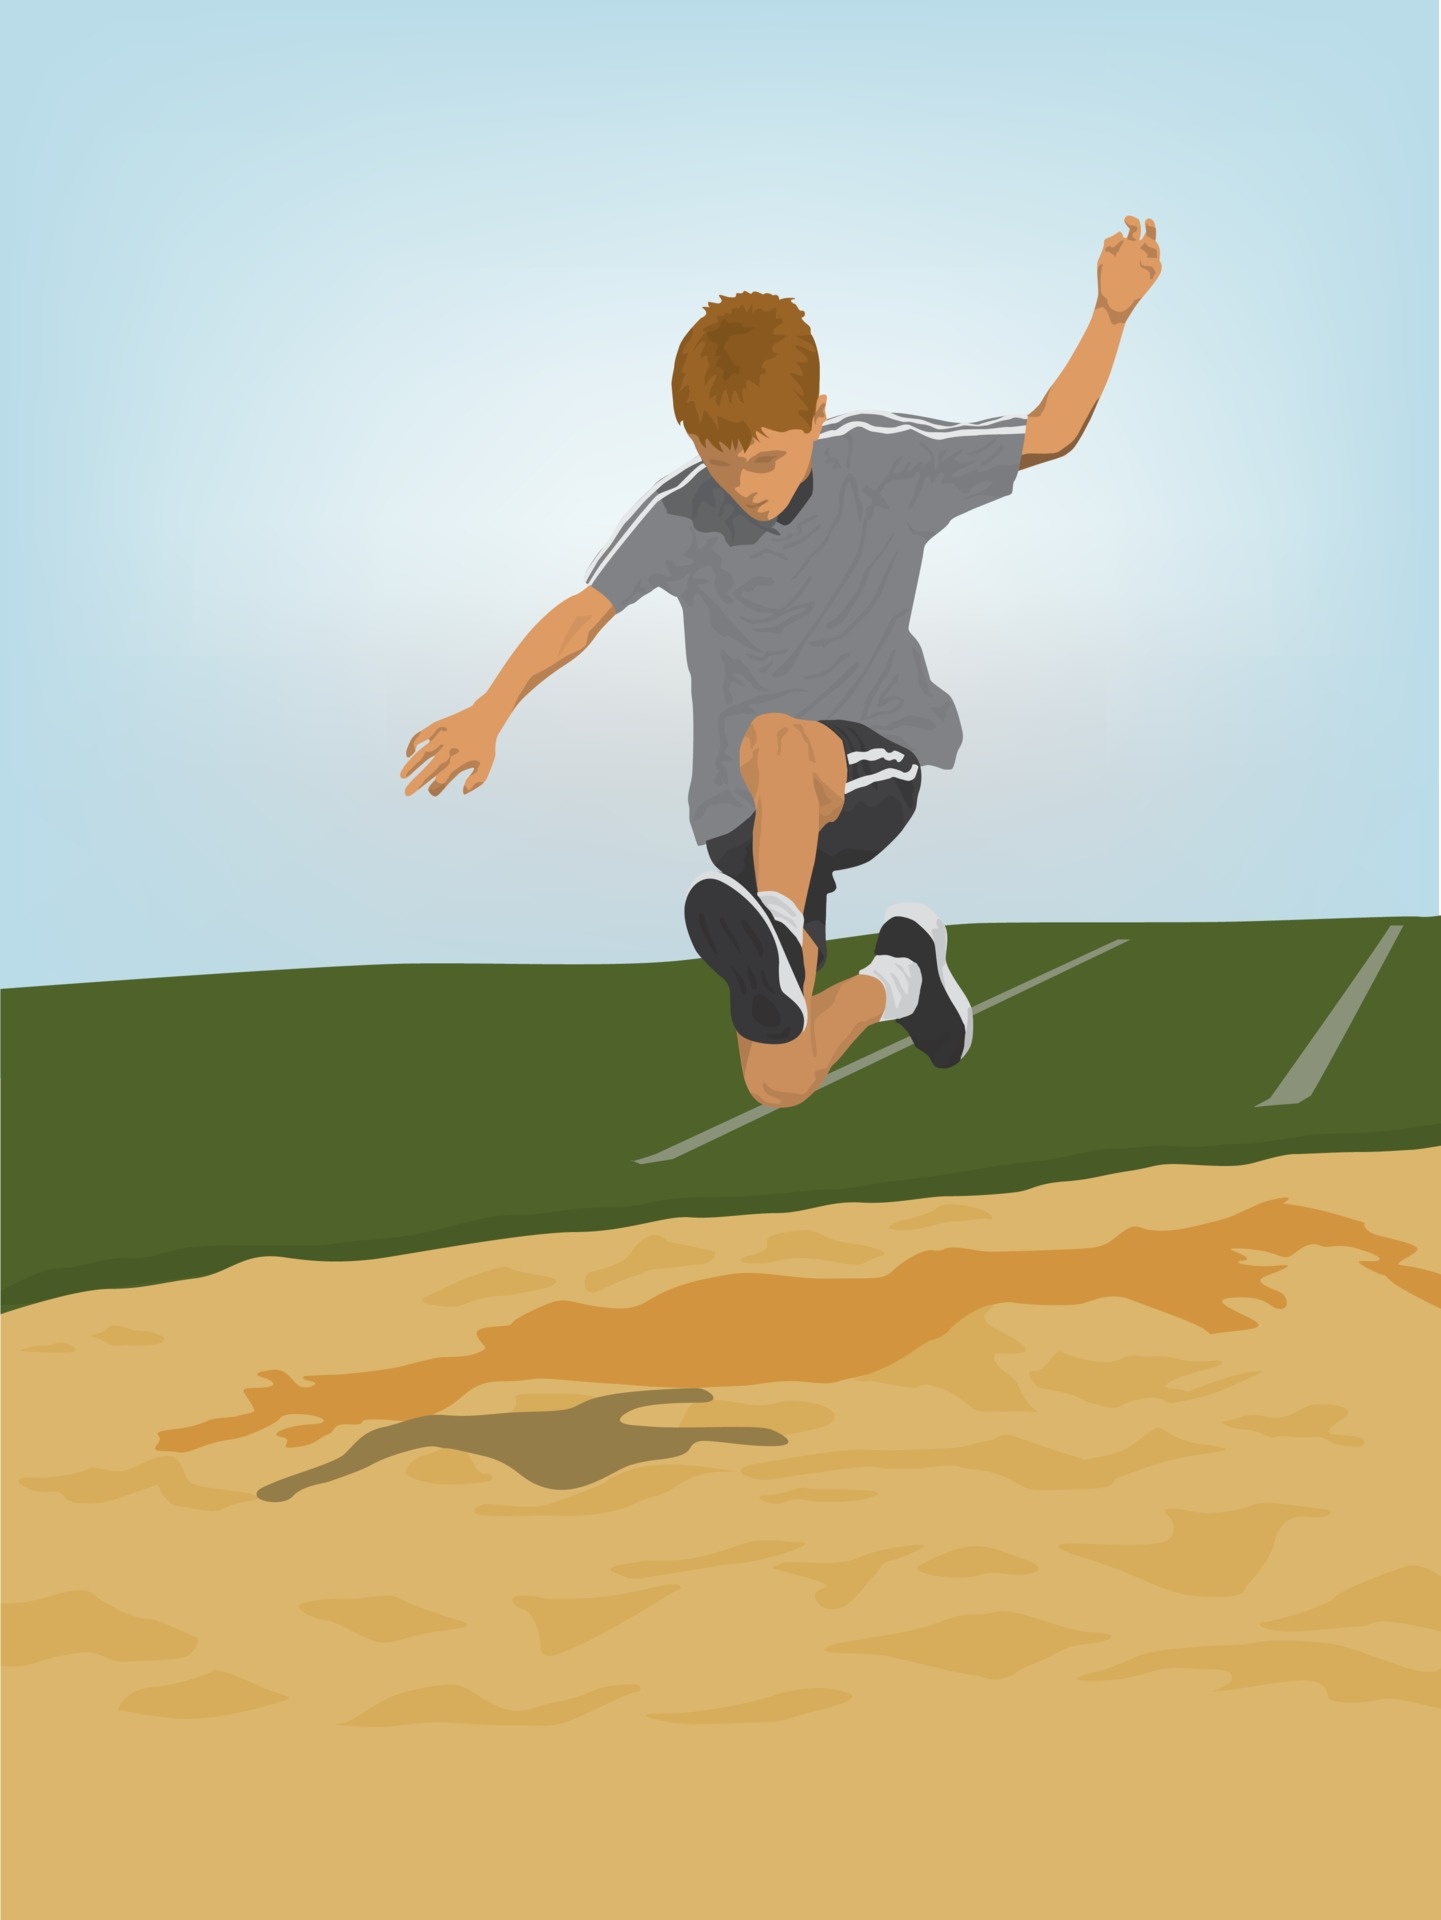 Jumping: Long jump, Track and field athletics, Summer sports for beginners, Graphic vector illustration. 1450x1920 HD Wallpaper.